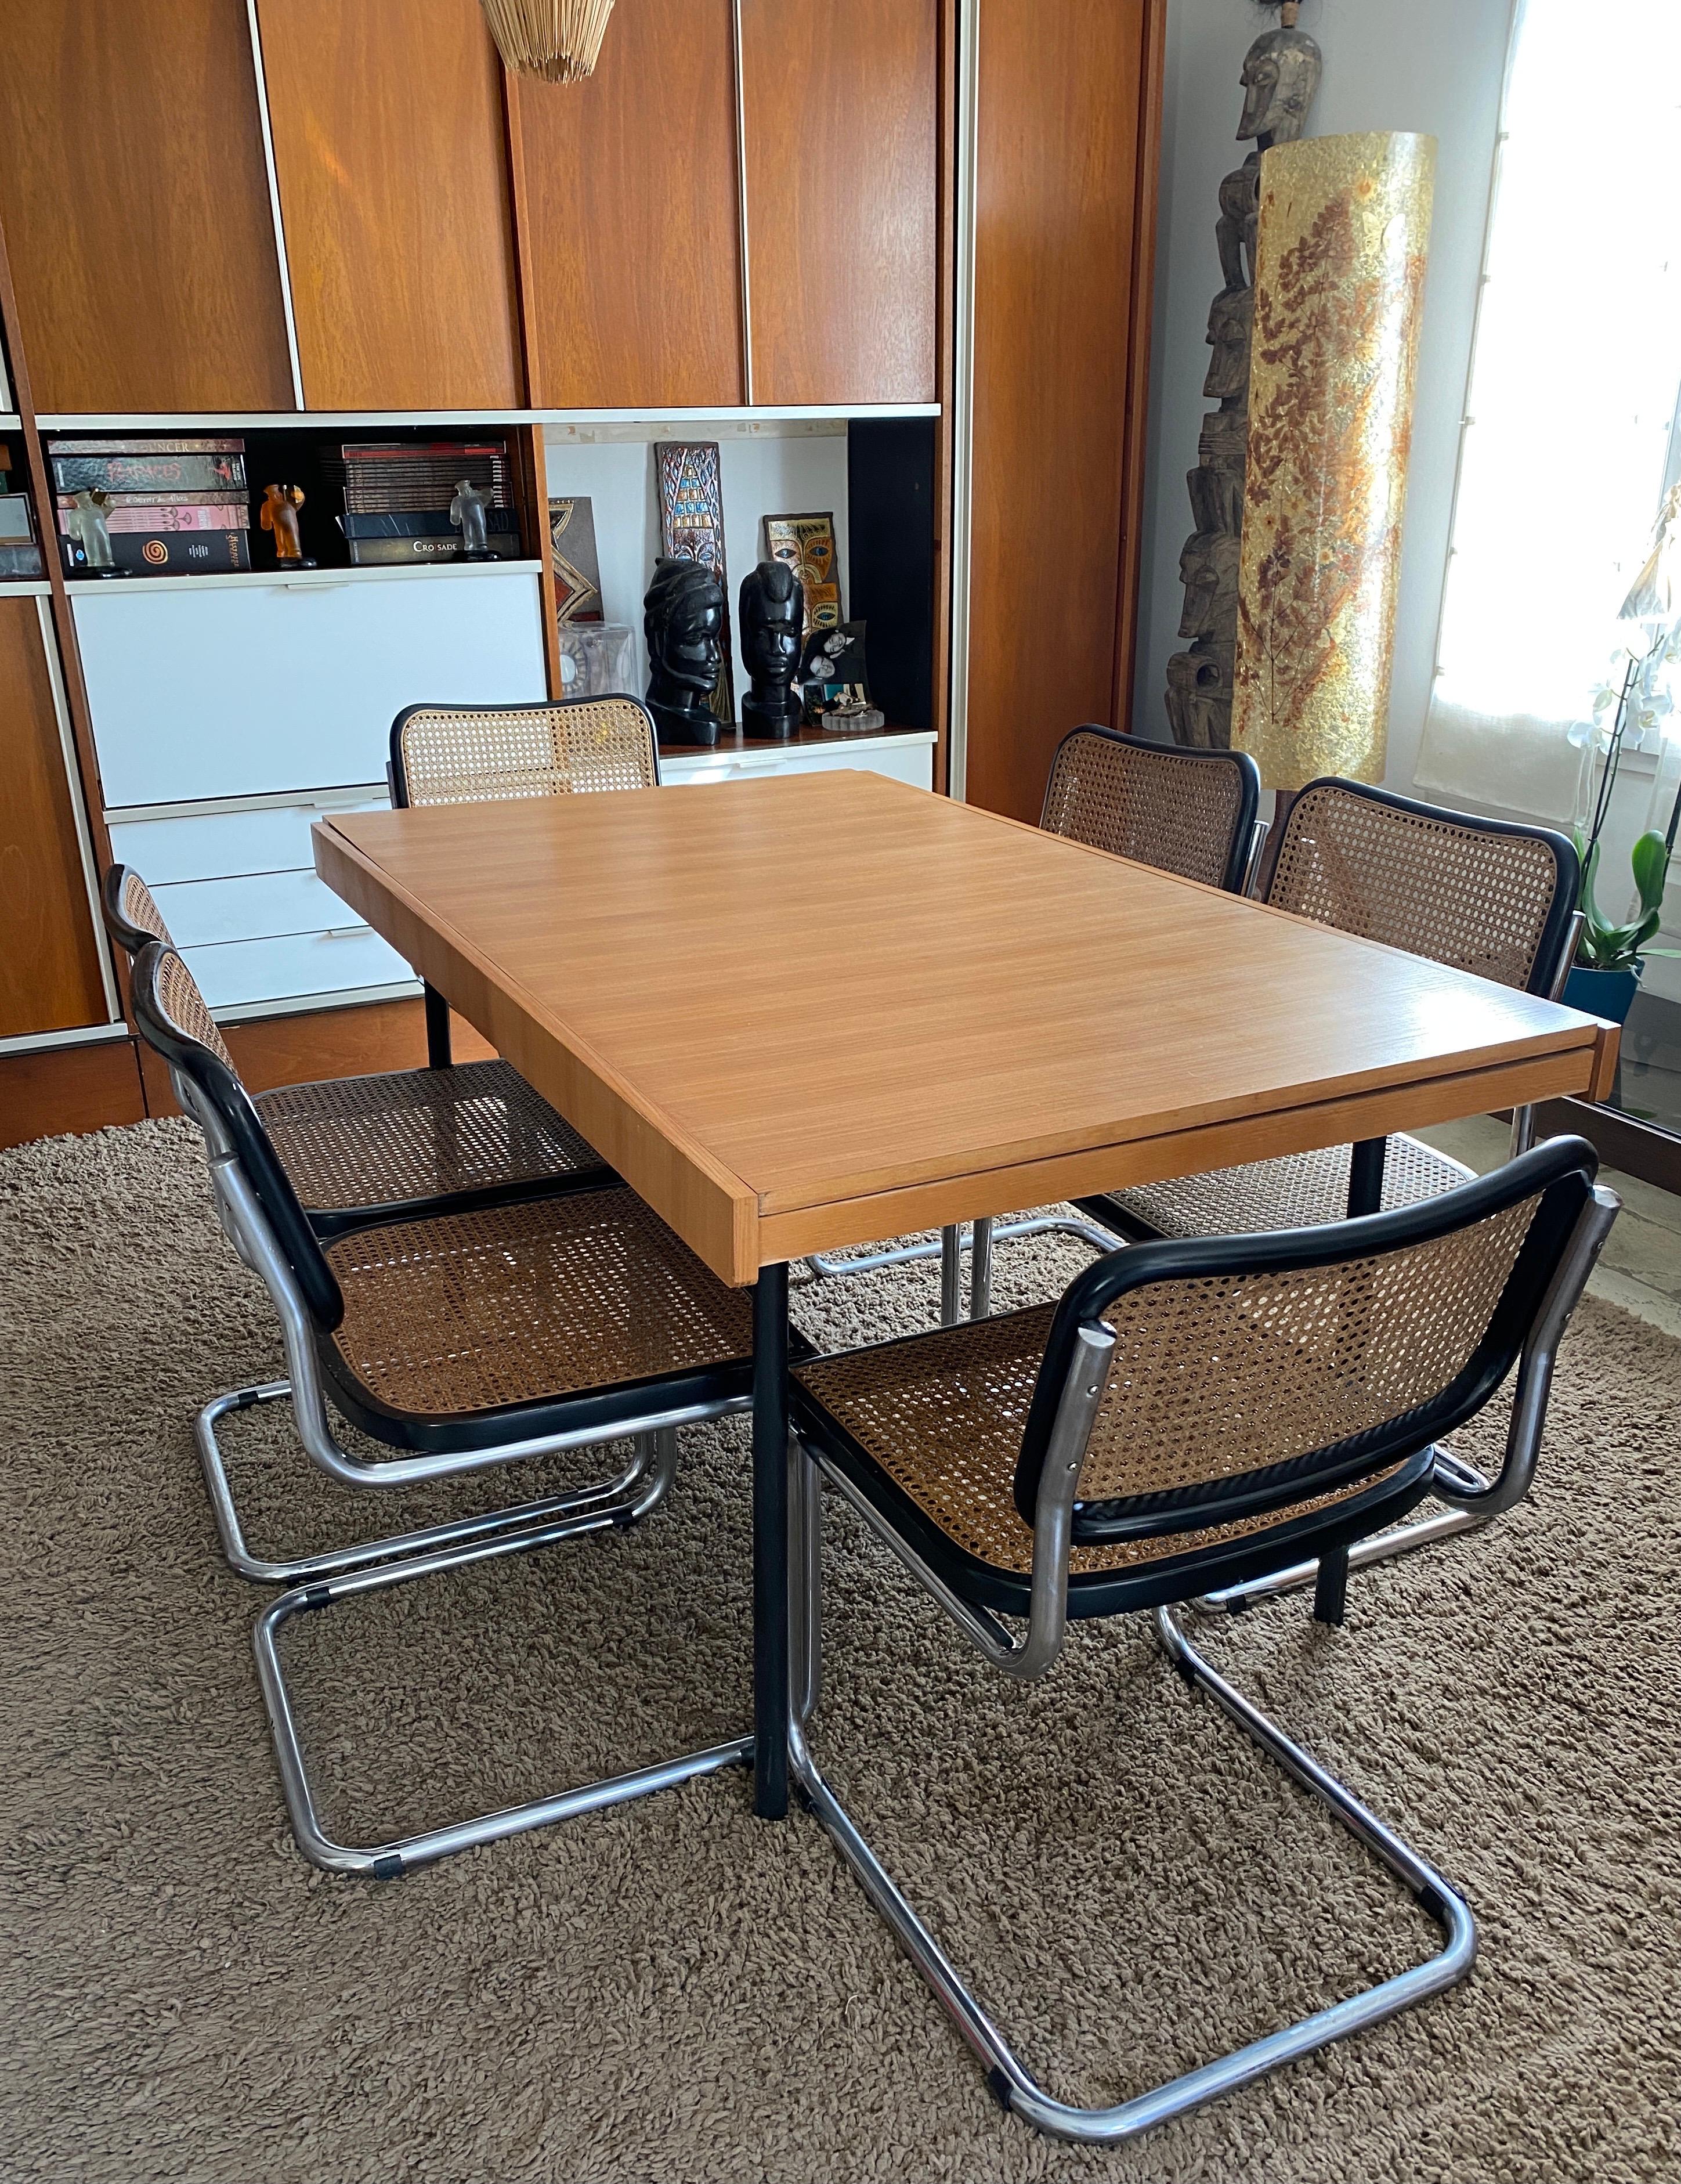 Table gérard guermonprez edition magnani, 1960 in elm with integrated 50cm extension tubular metal base. 150/200cm long /75 high and 89 wide good condition.
Gérard Guermonprez 20th-century French designer. He is known for his simple, functional